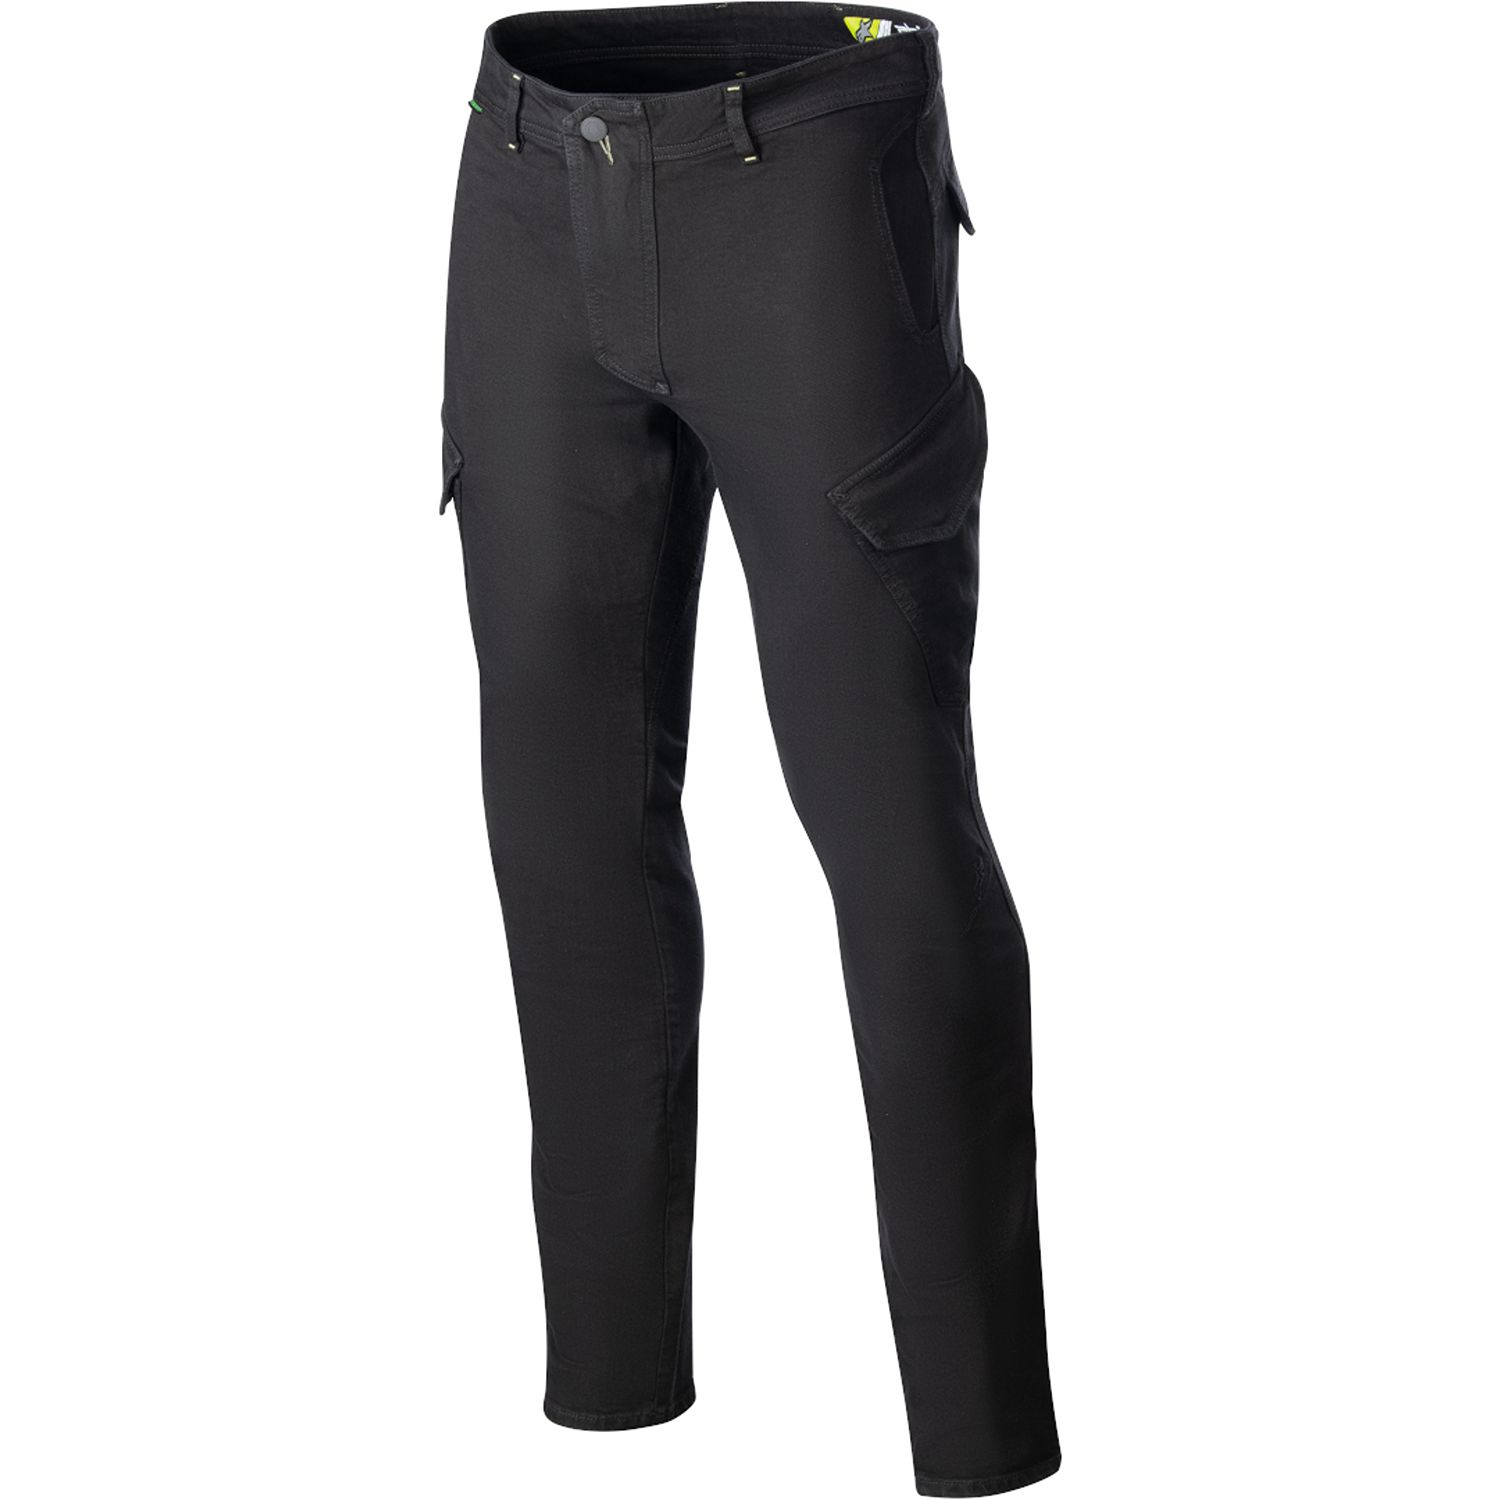 Image of Alpinestars Caliber Slim Fit Tech Riding Pants Anthracite Taille 32